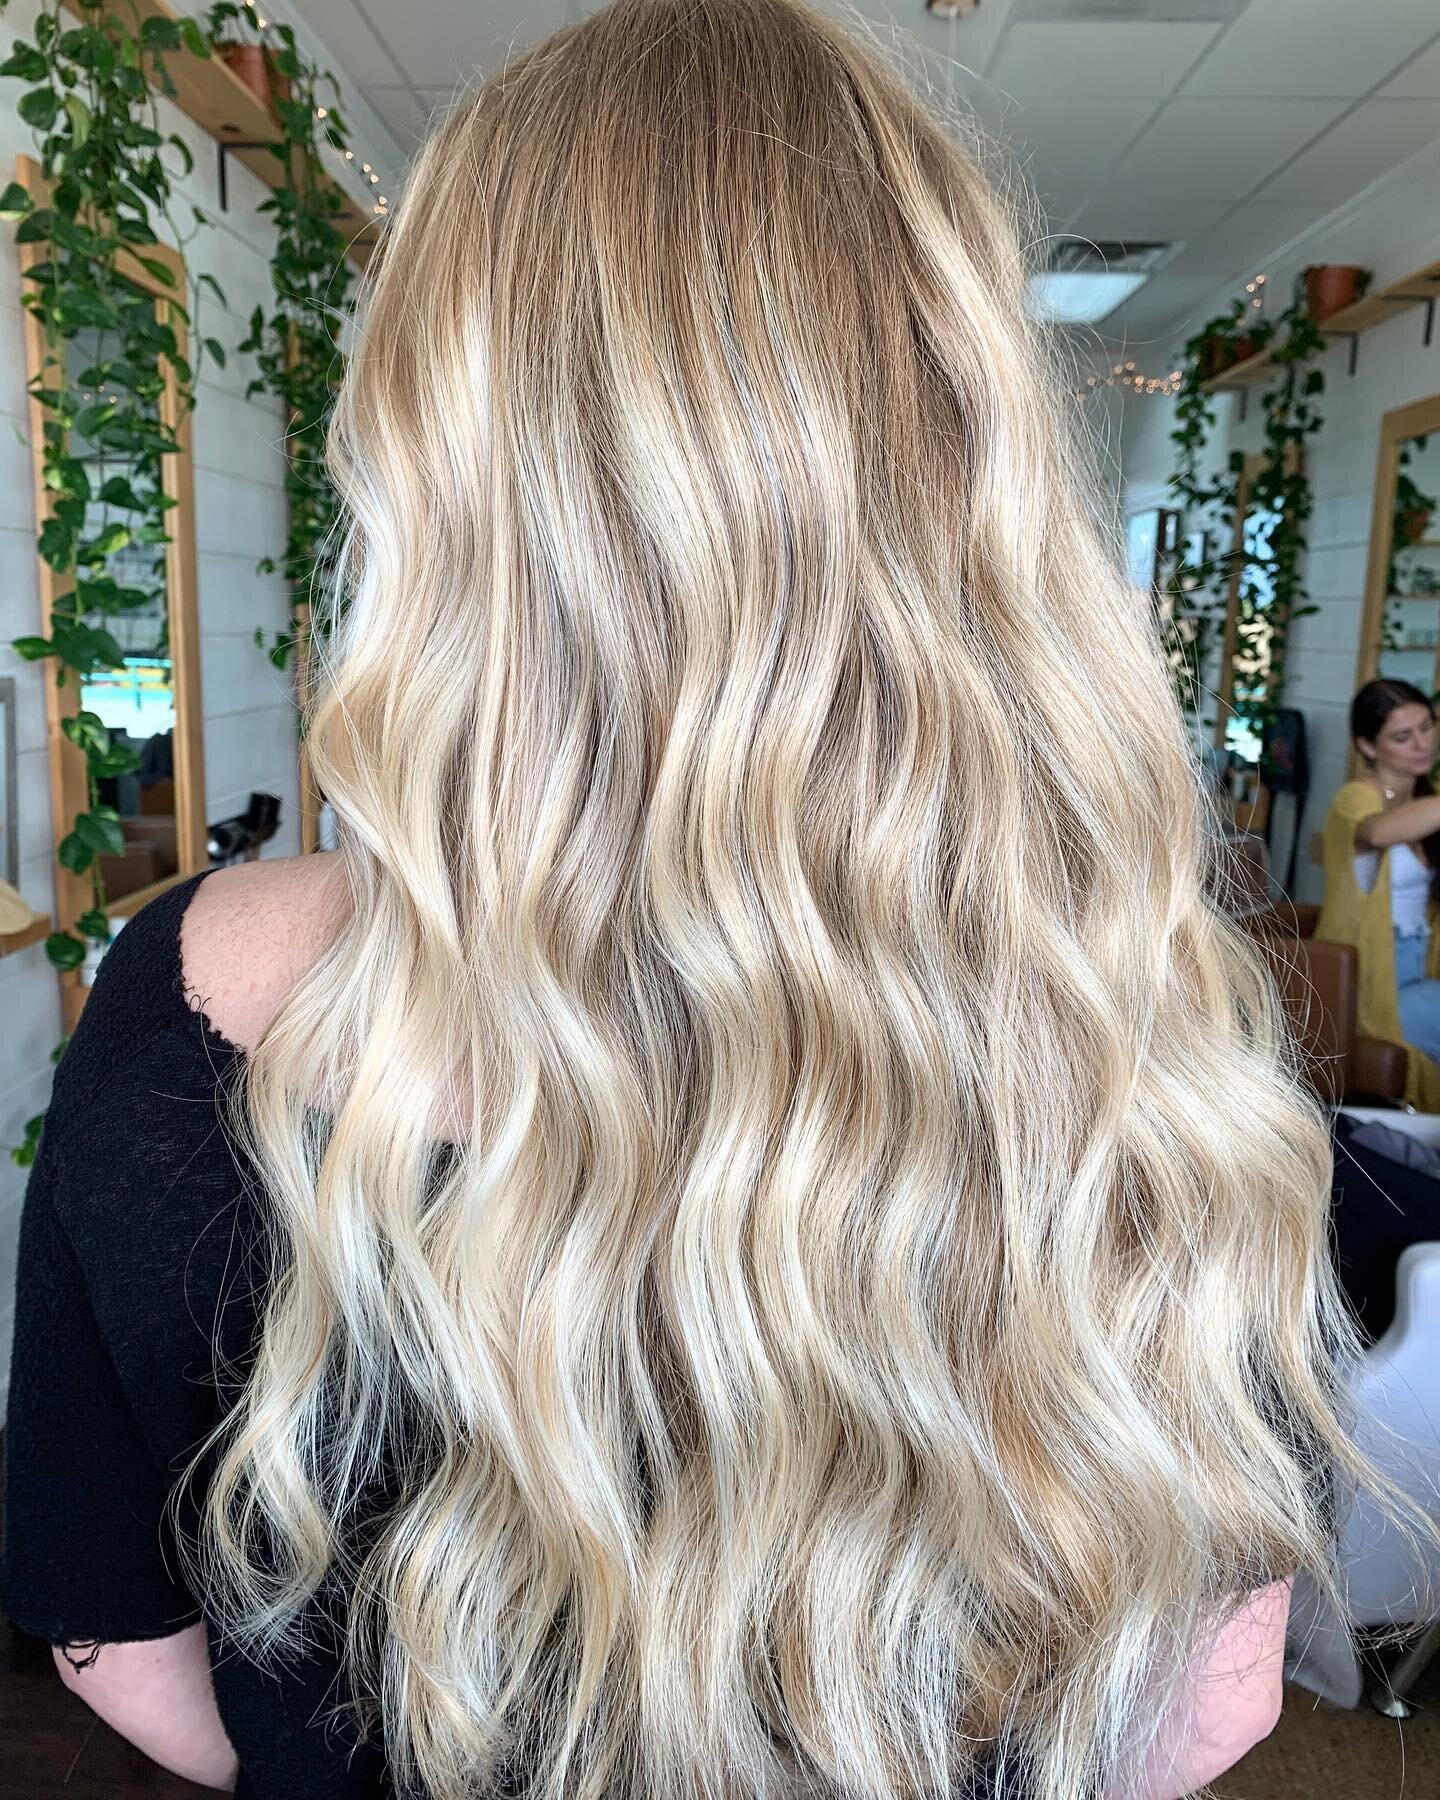 island hair vibes with this balayage + root shadow combo for a seamless grow out + fade. 🏝✨
Stylist @wildismyfavoritecolor 
@oliverandcohair 
&bull;
&bull;
&bull;
&bull;
#mauihairstylist #mauihairsalon #mauilife #mauihair #mauibalayage #mauiblonde #